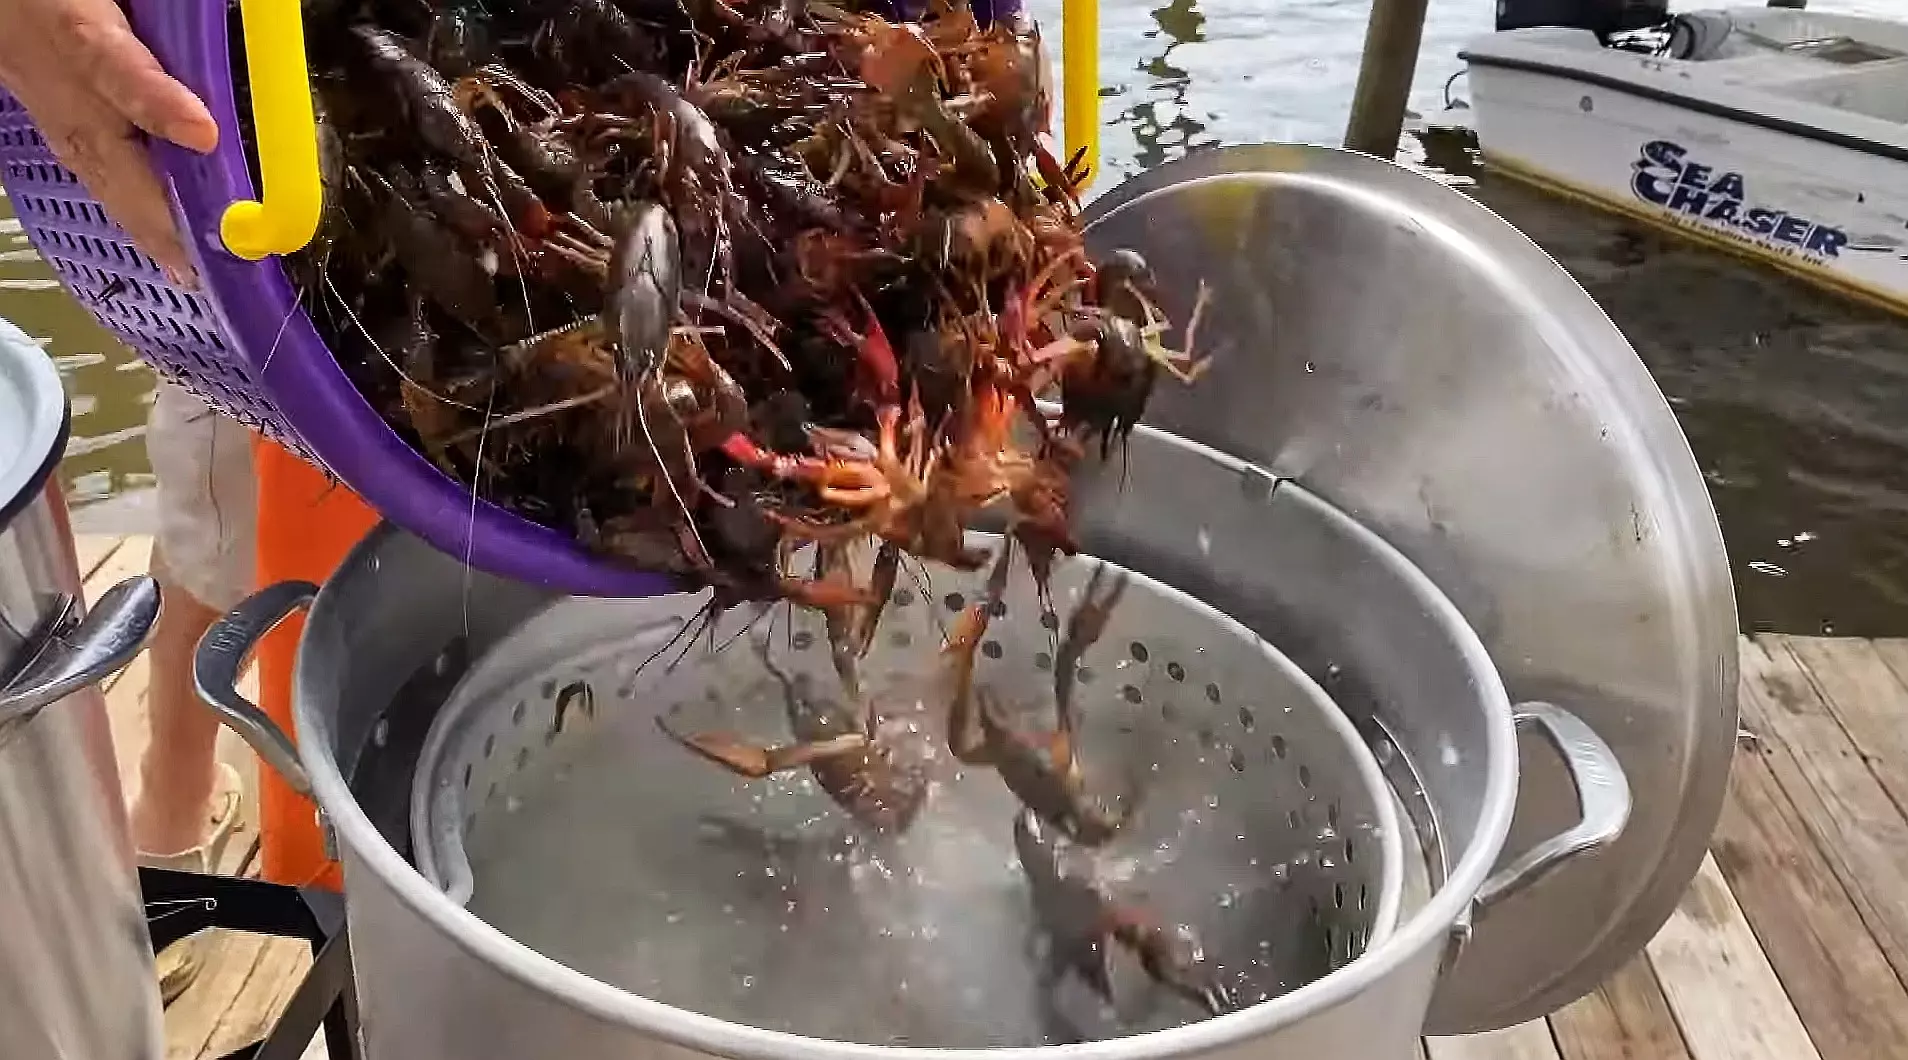 Crawfish Boiling 'Two Pot Method' - Does it Work?